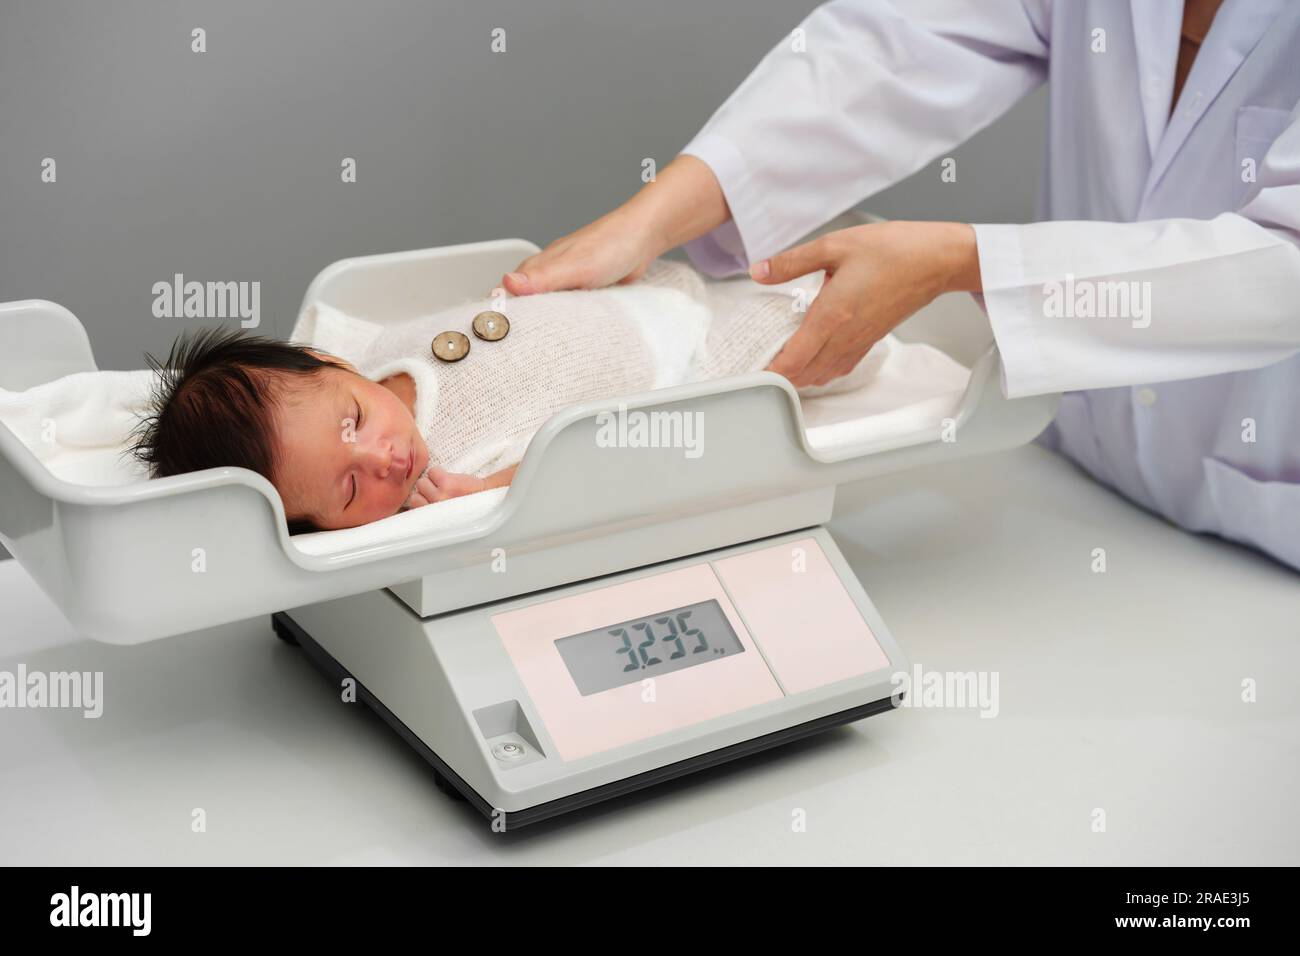 https://c8.alamy.com/comp/2RAE3J5/newborn-baby-weight-measurement-on-the-digital-scales-with-doctor-in-hospital-2RAE3J5.jpg